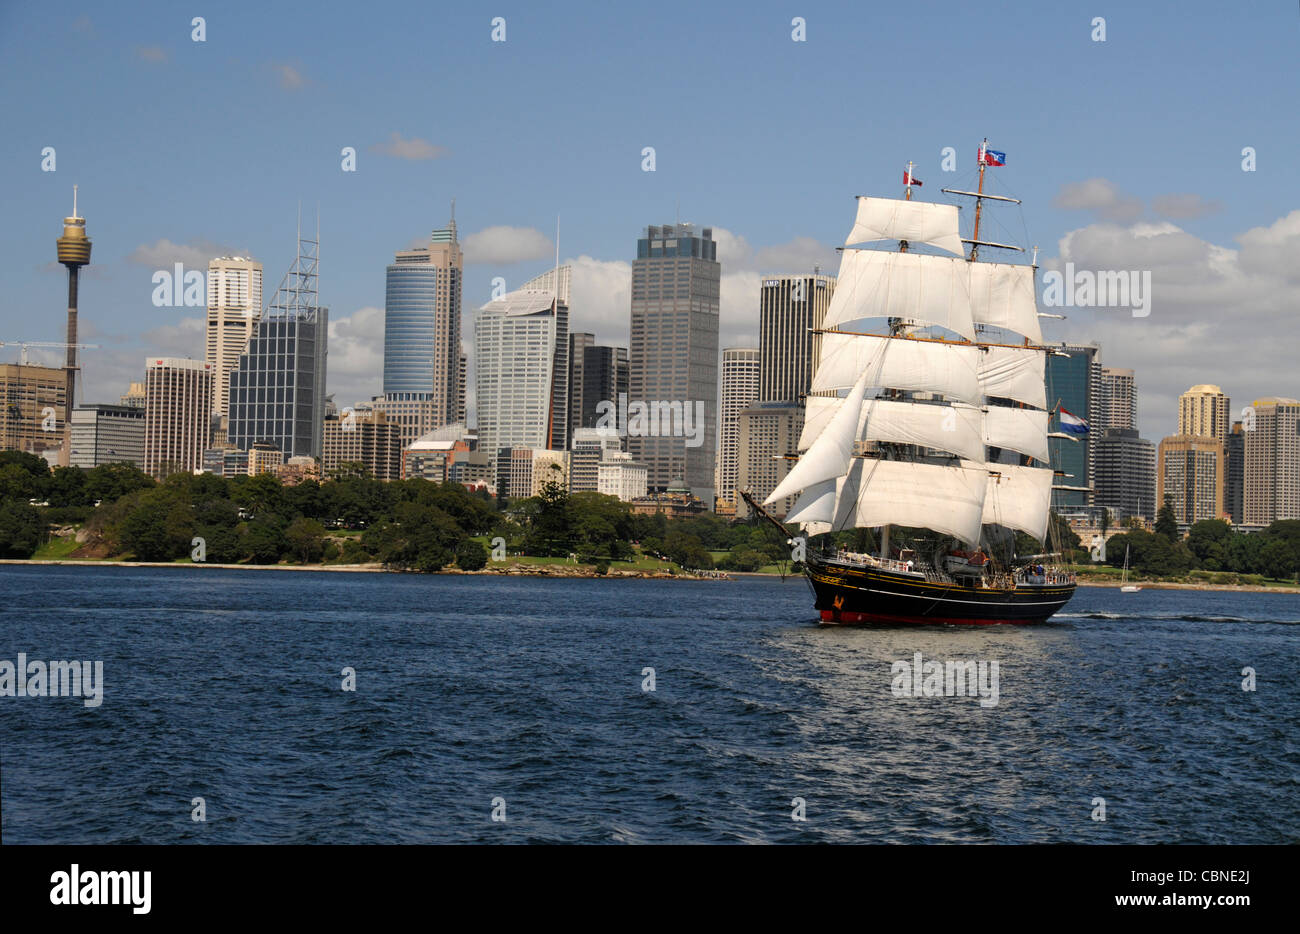 The three-mast clipper, Stad Amsterdam, built in Amsterdam in the Netherlands in 2,000, makes her way along  Sydney bay towards the open sea after her Stock Photo